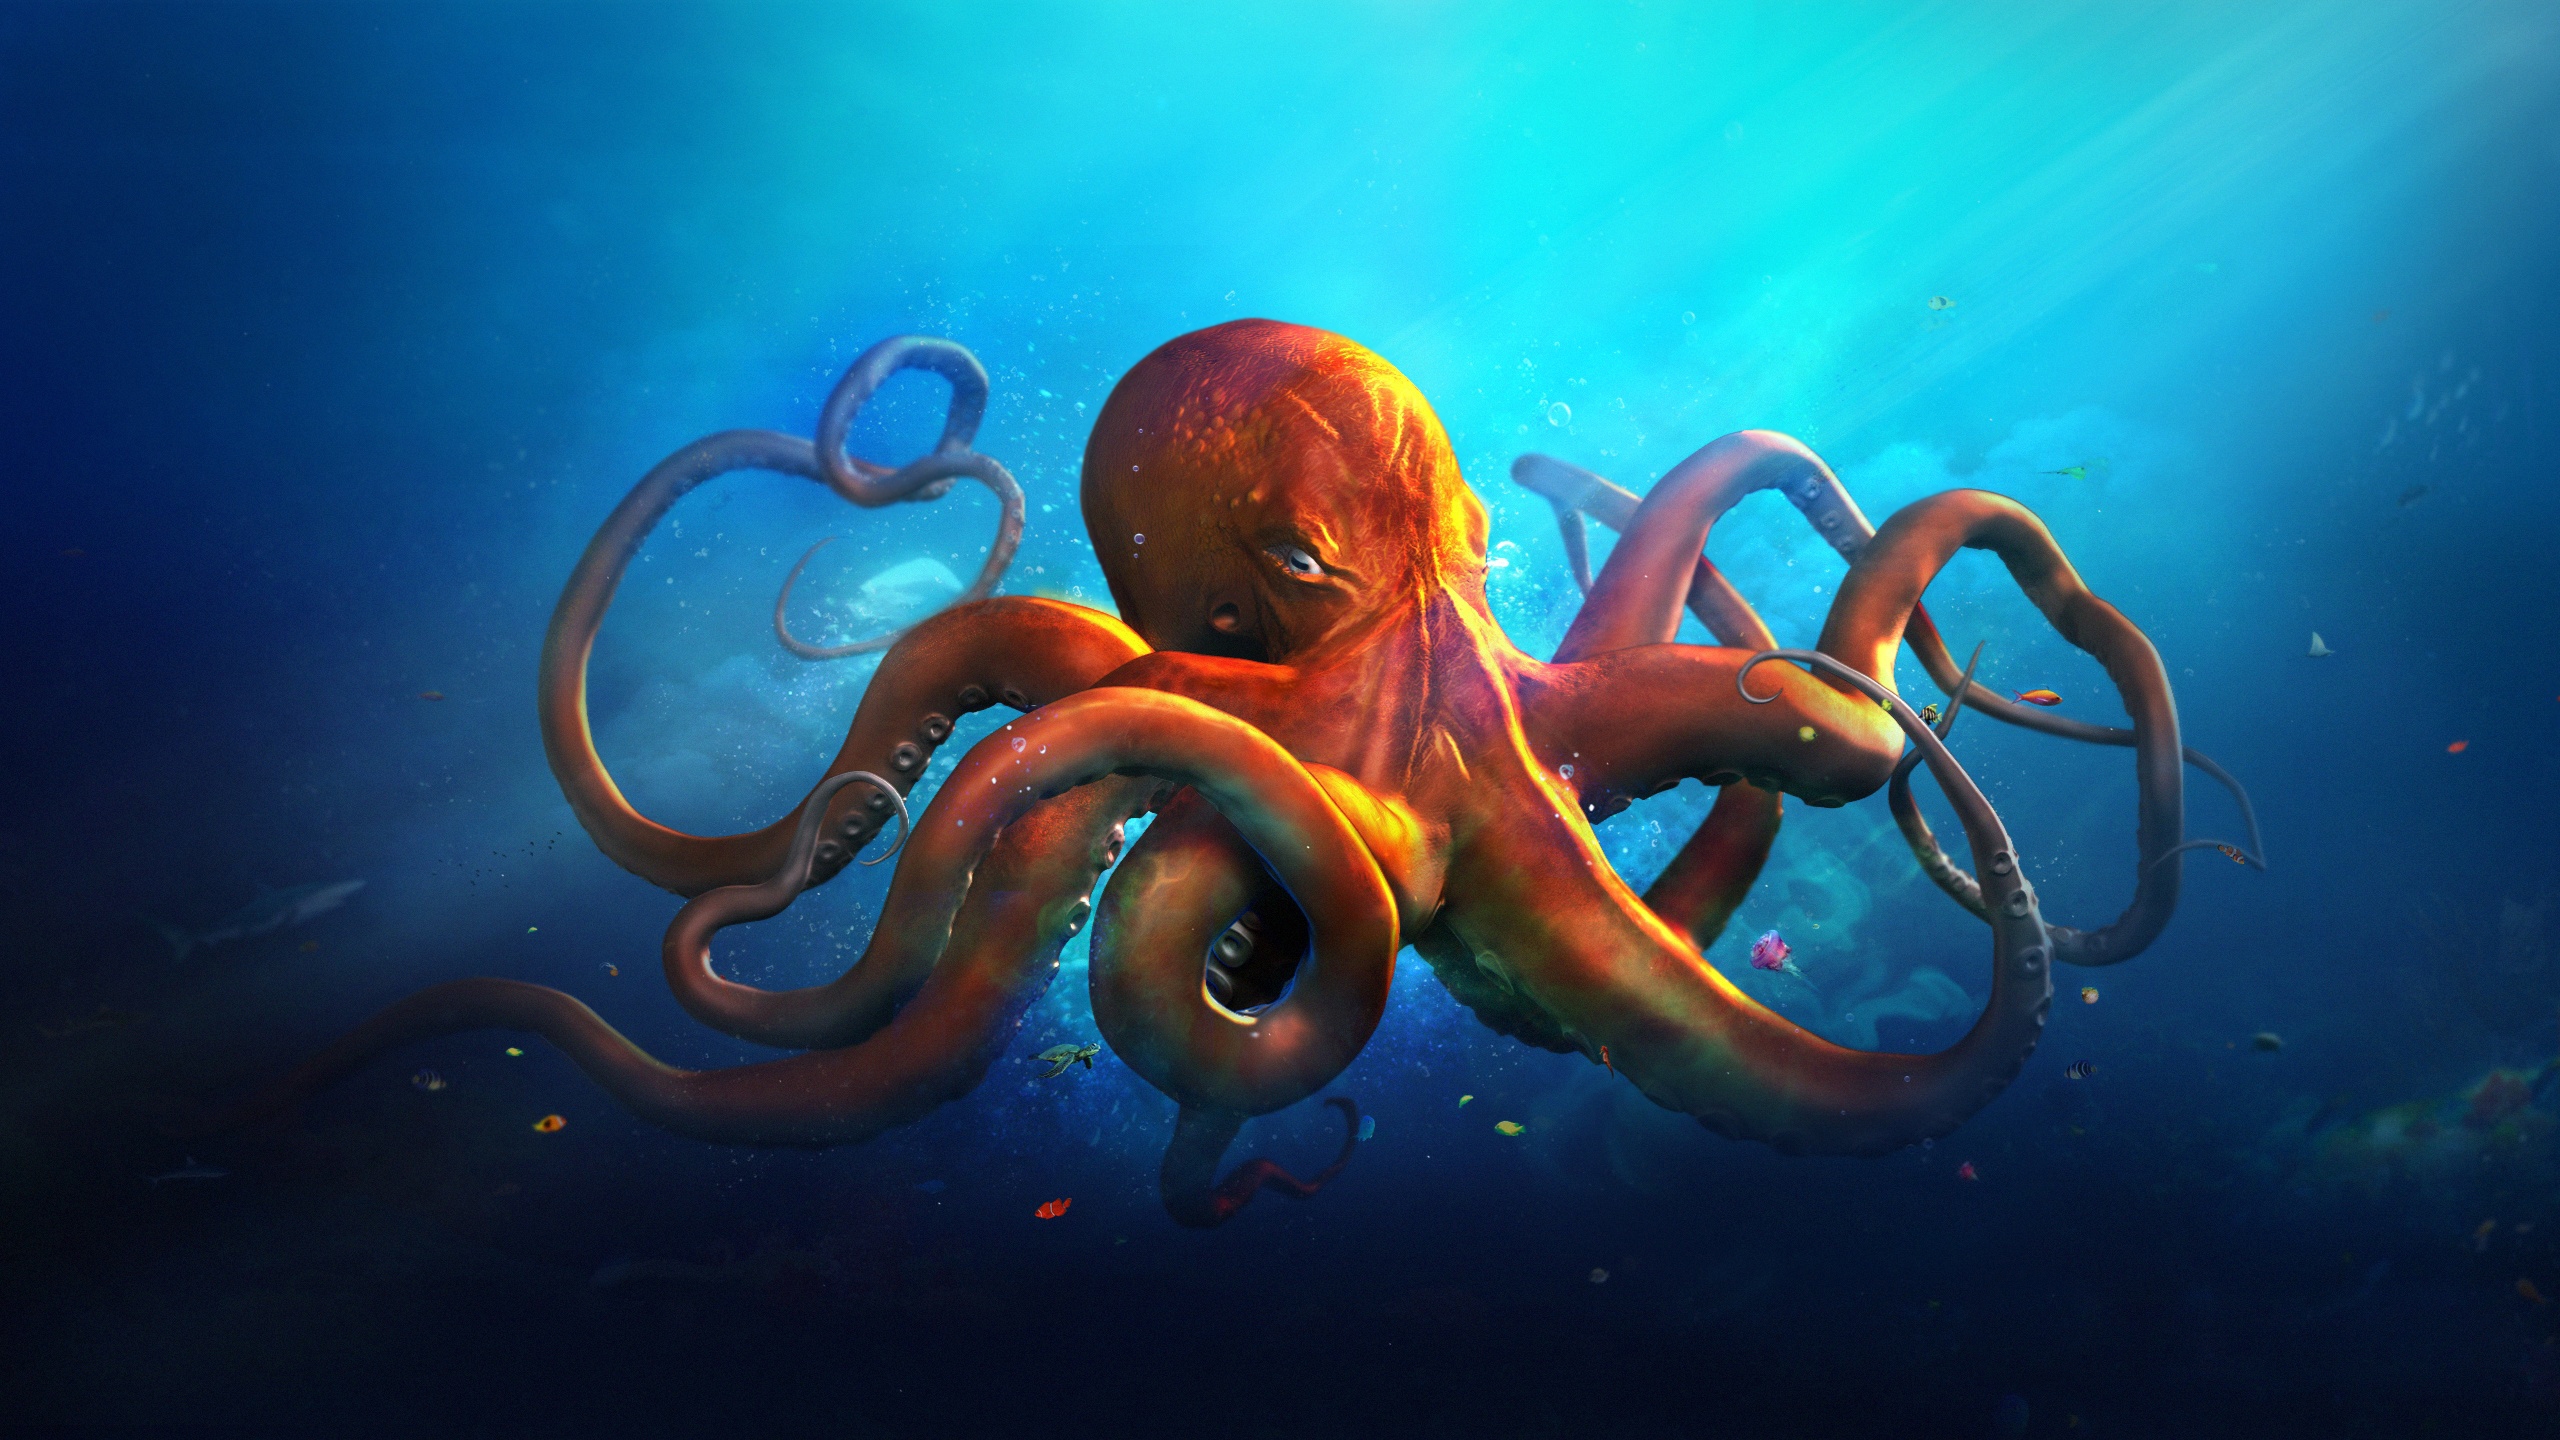 Just an Octopus for 2560x1440 HDTV resolution